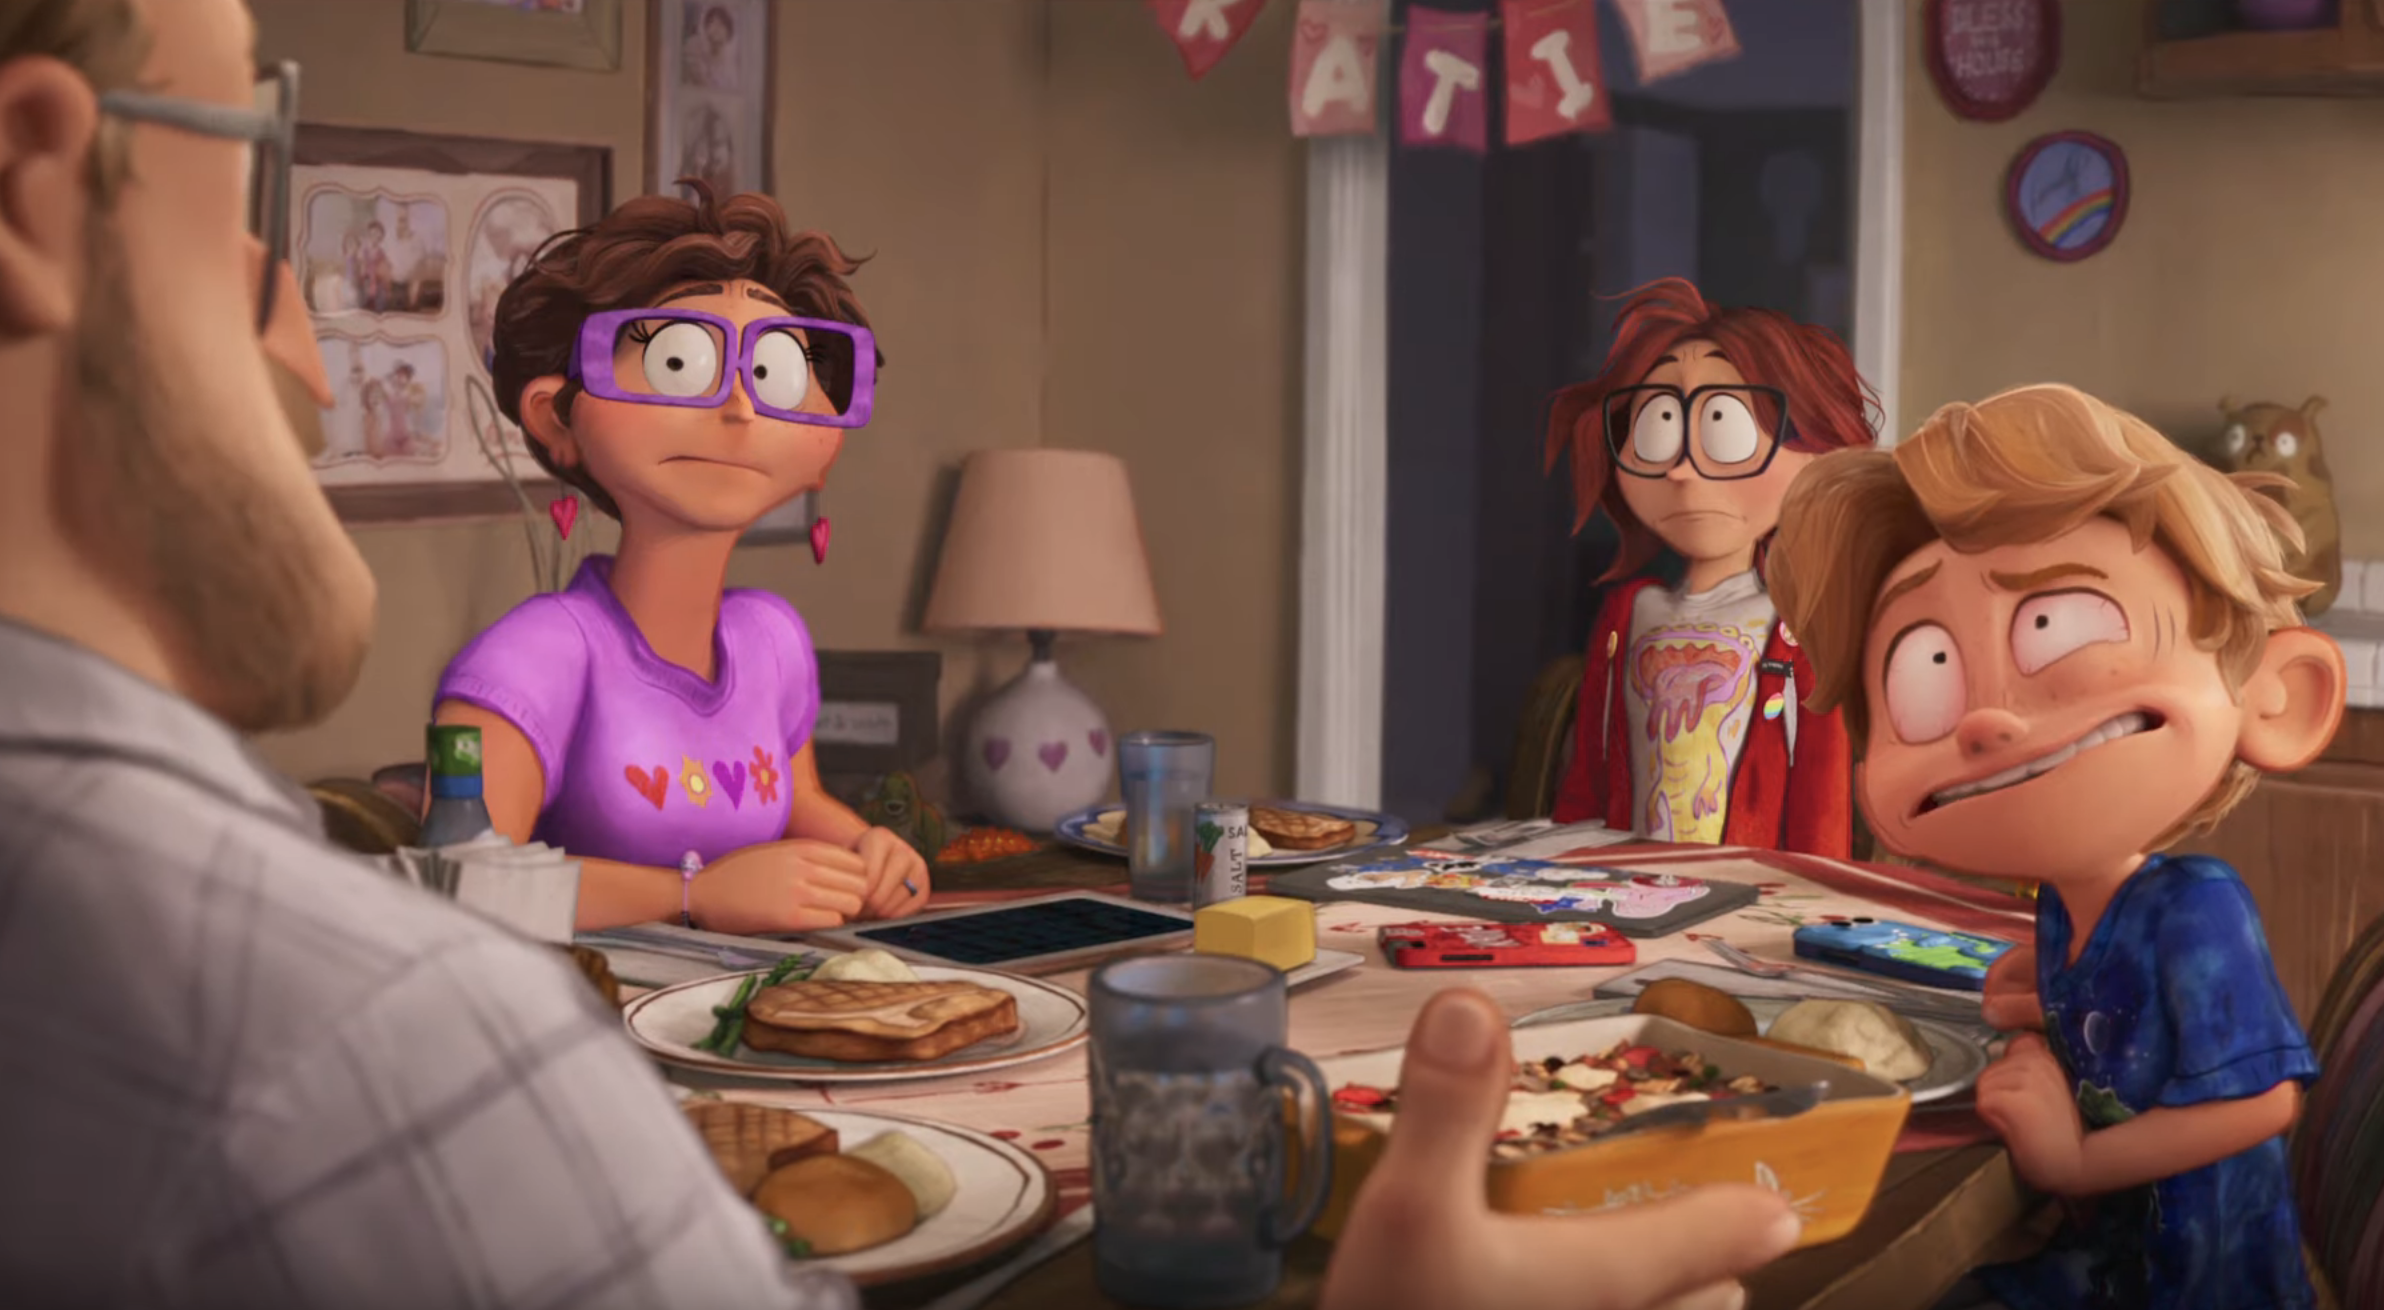 Connected' Trailer Shows Off Sony's Mixed-Media Animation - Movie News Net